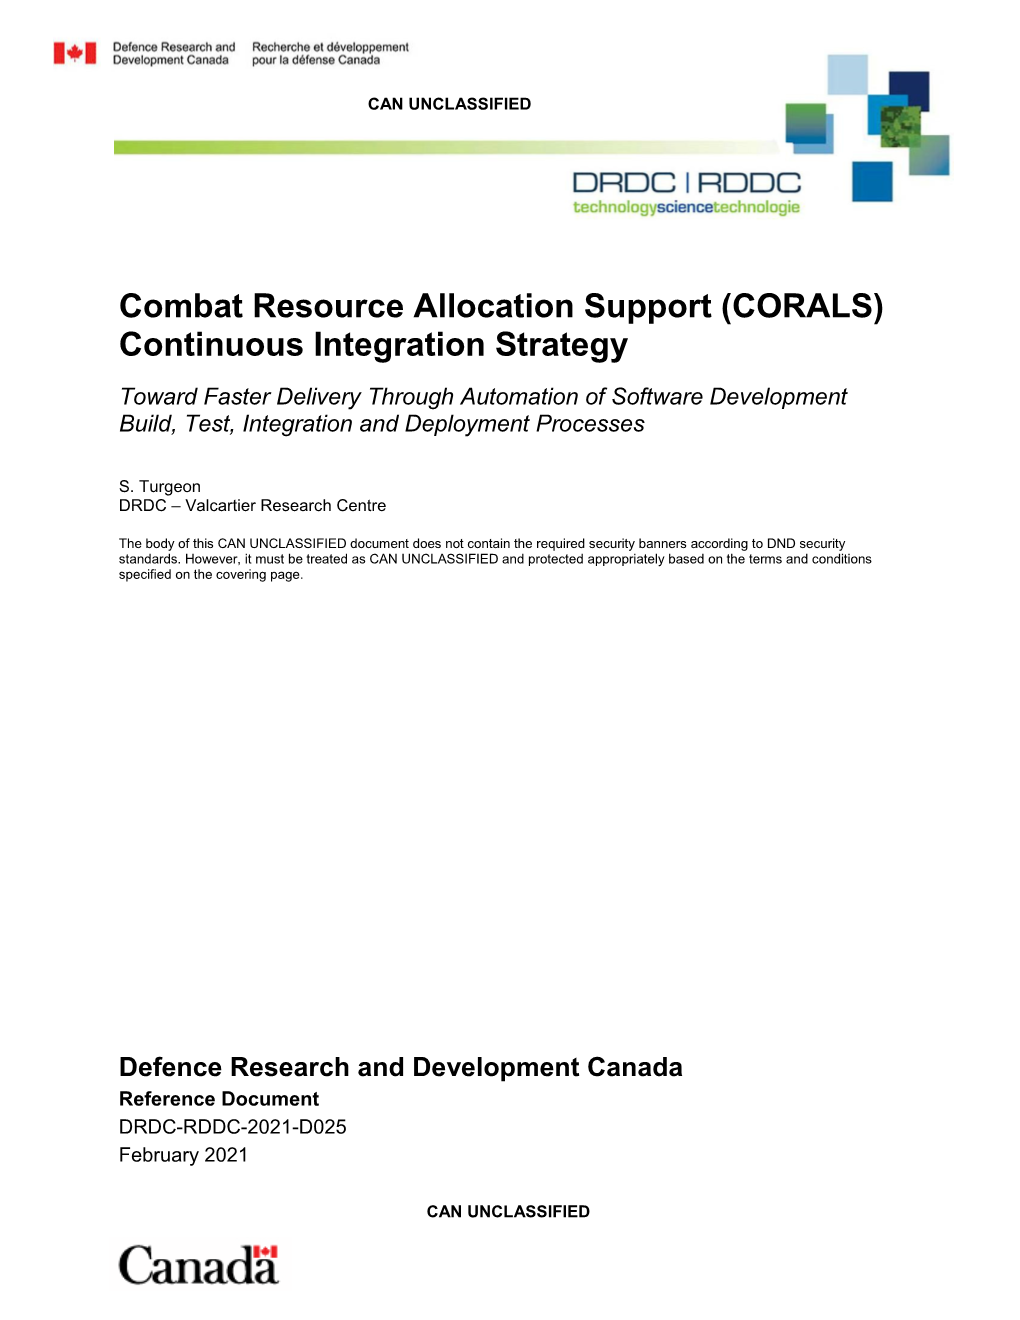 Continuous Integration Strategy Toward Faster Delivery Through Automation of Software Development Build, Test, Integration and Deployment Processes